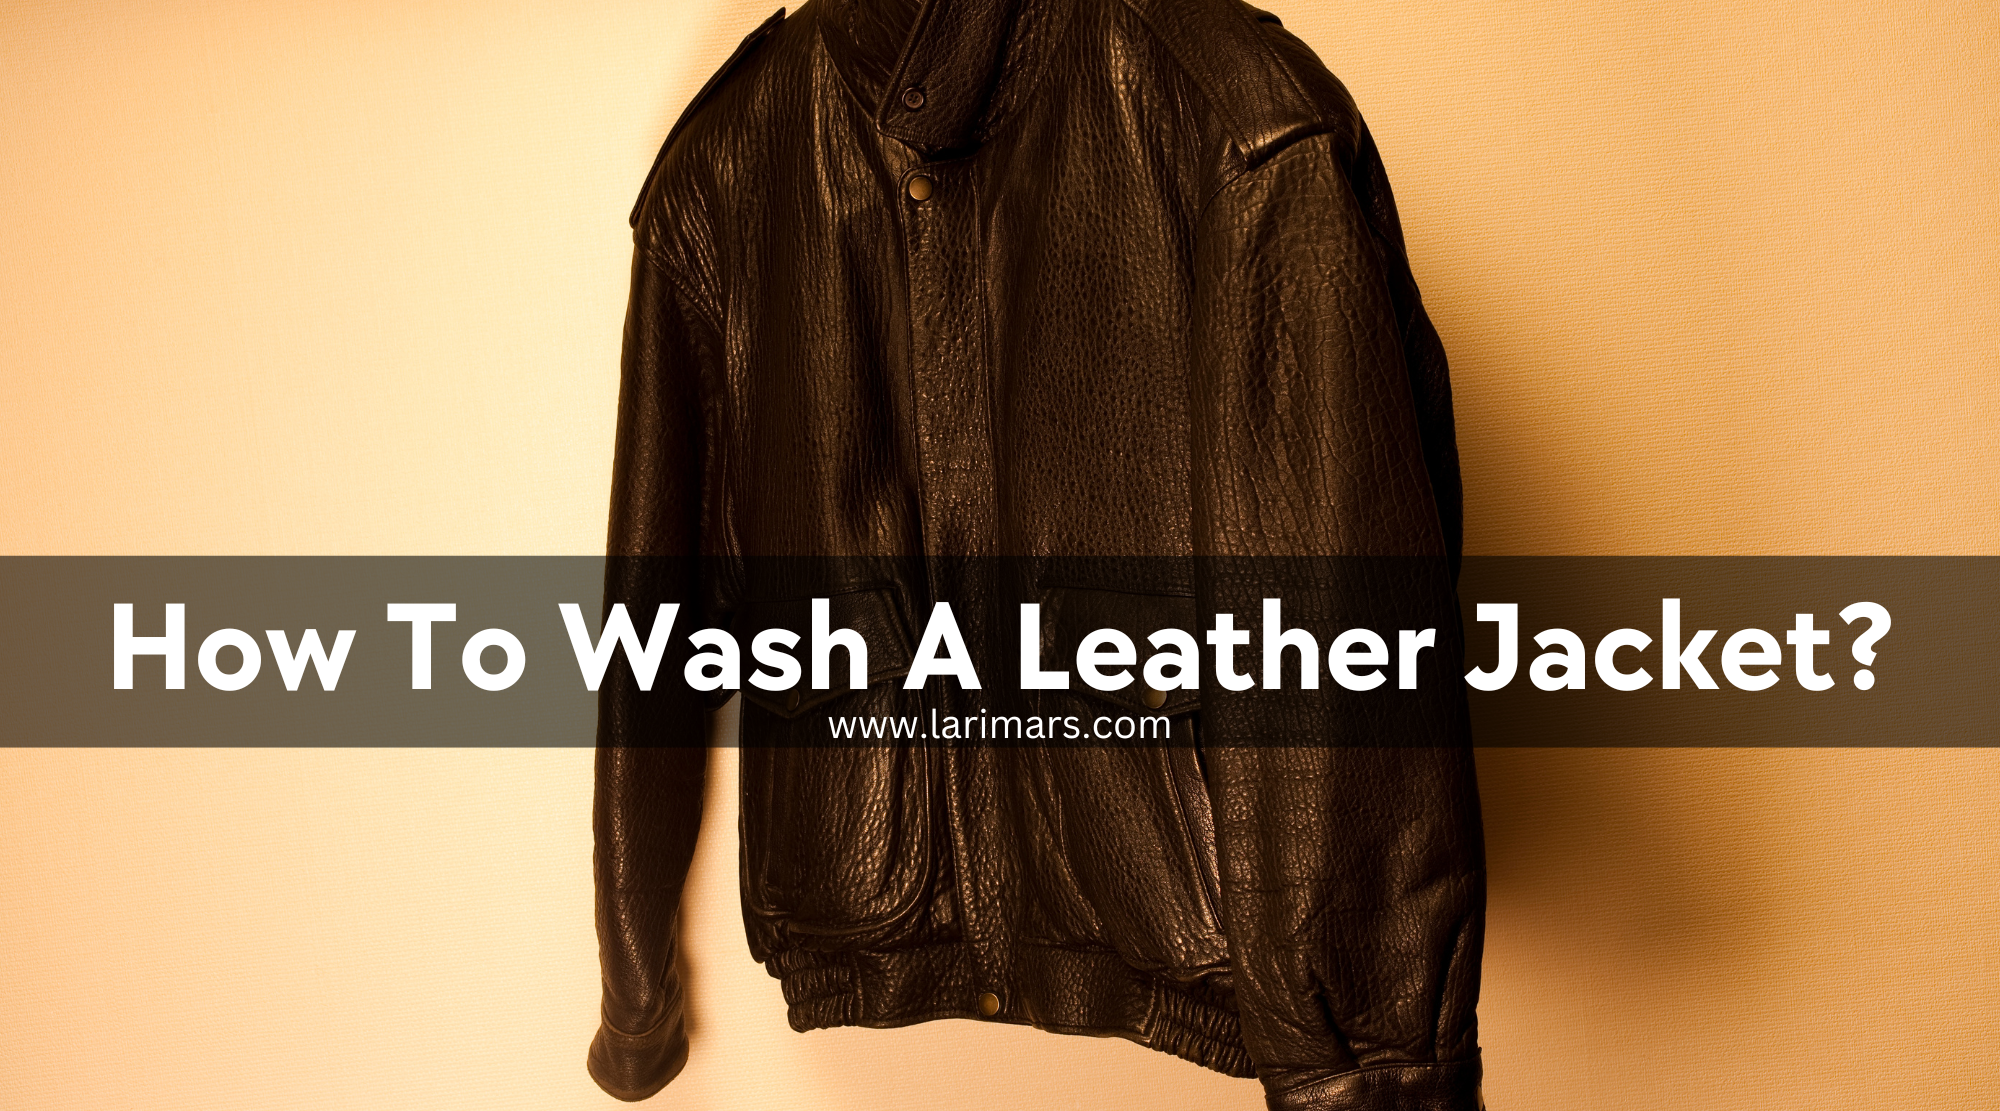 How To Wash A Leather Jacket?